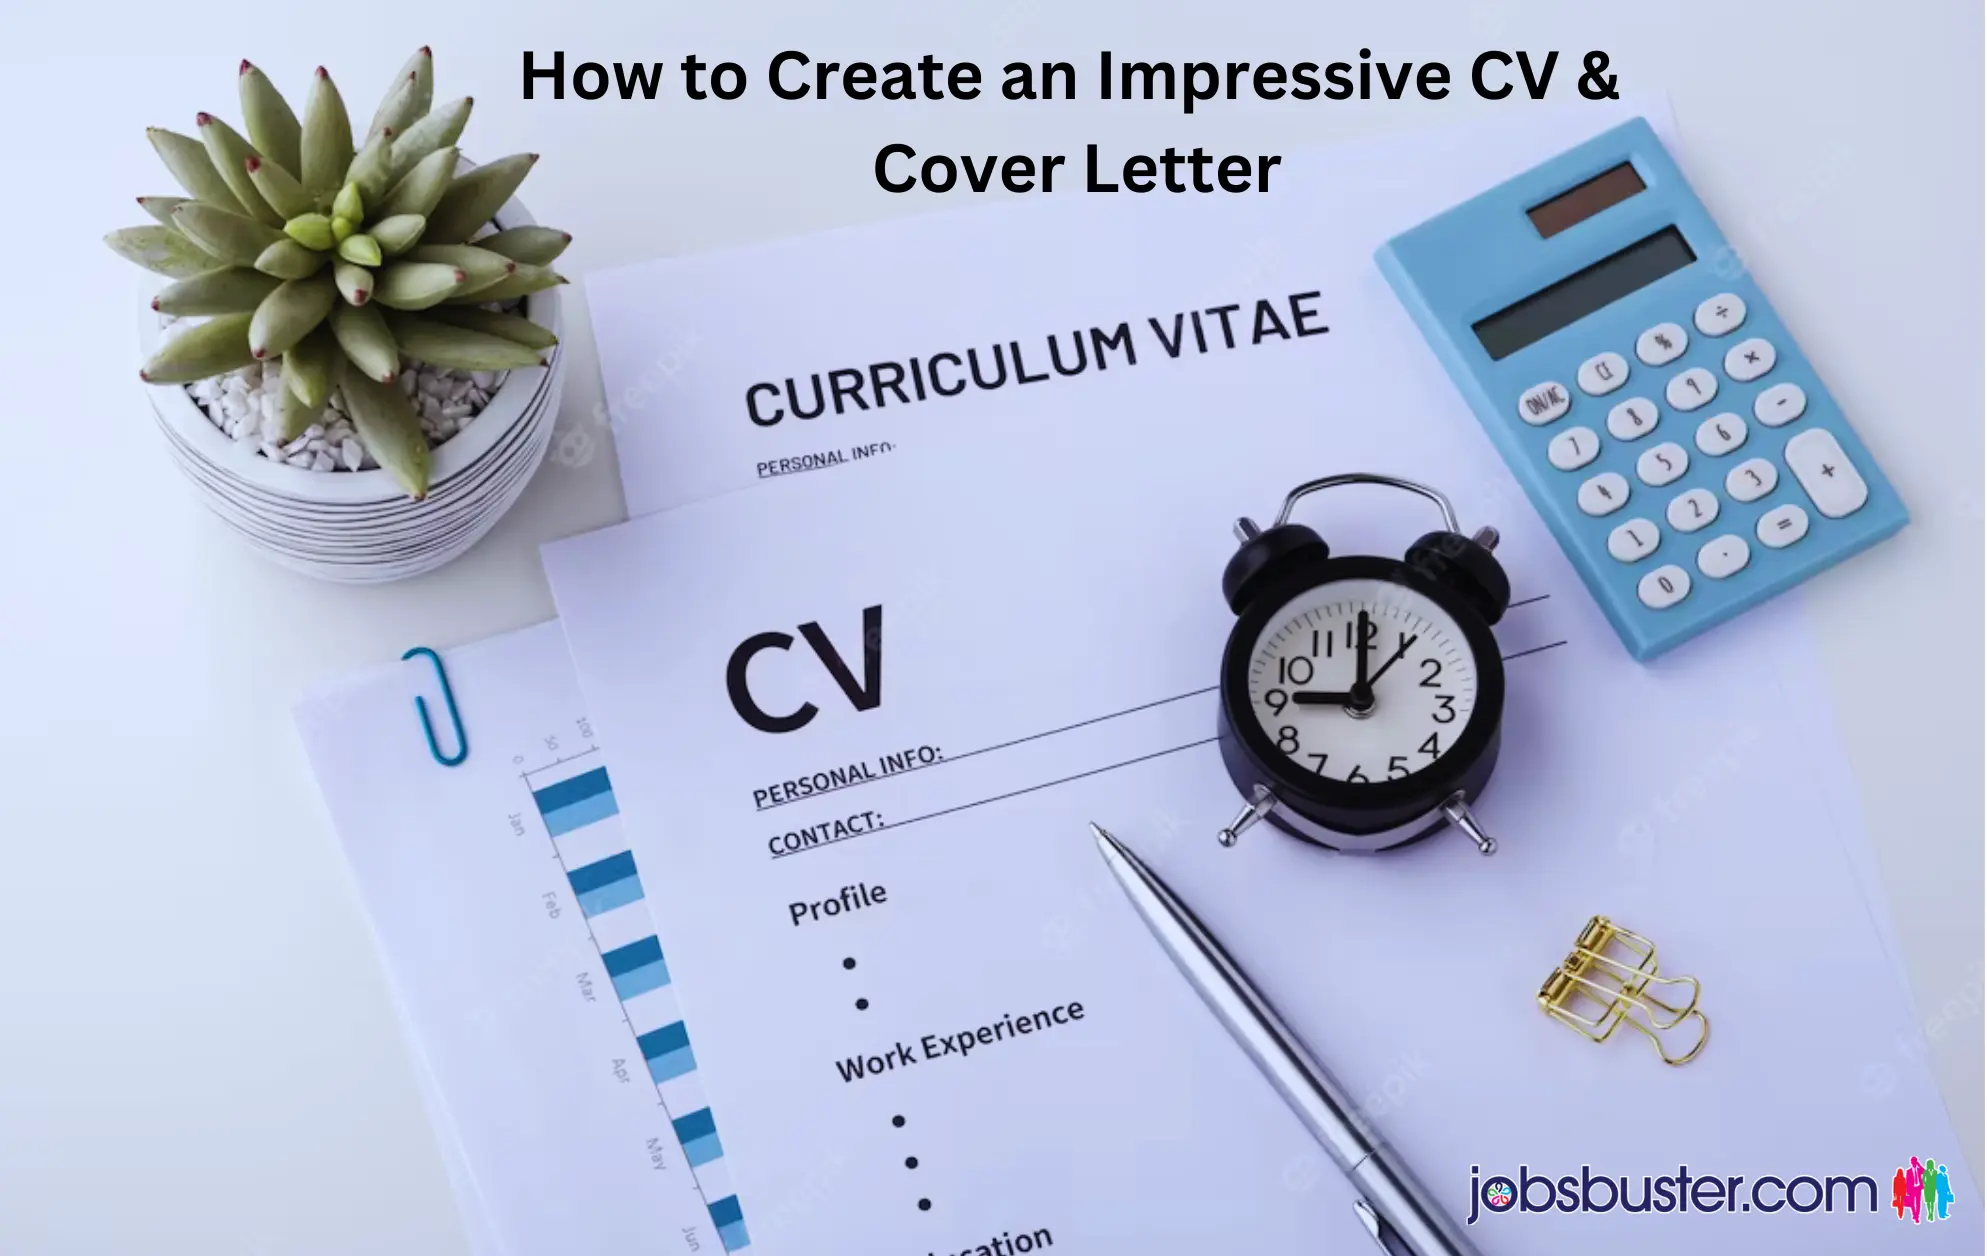 How to Create an Impressive CV & Cover Letter